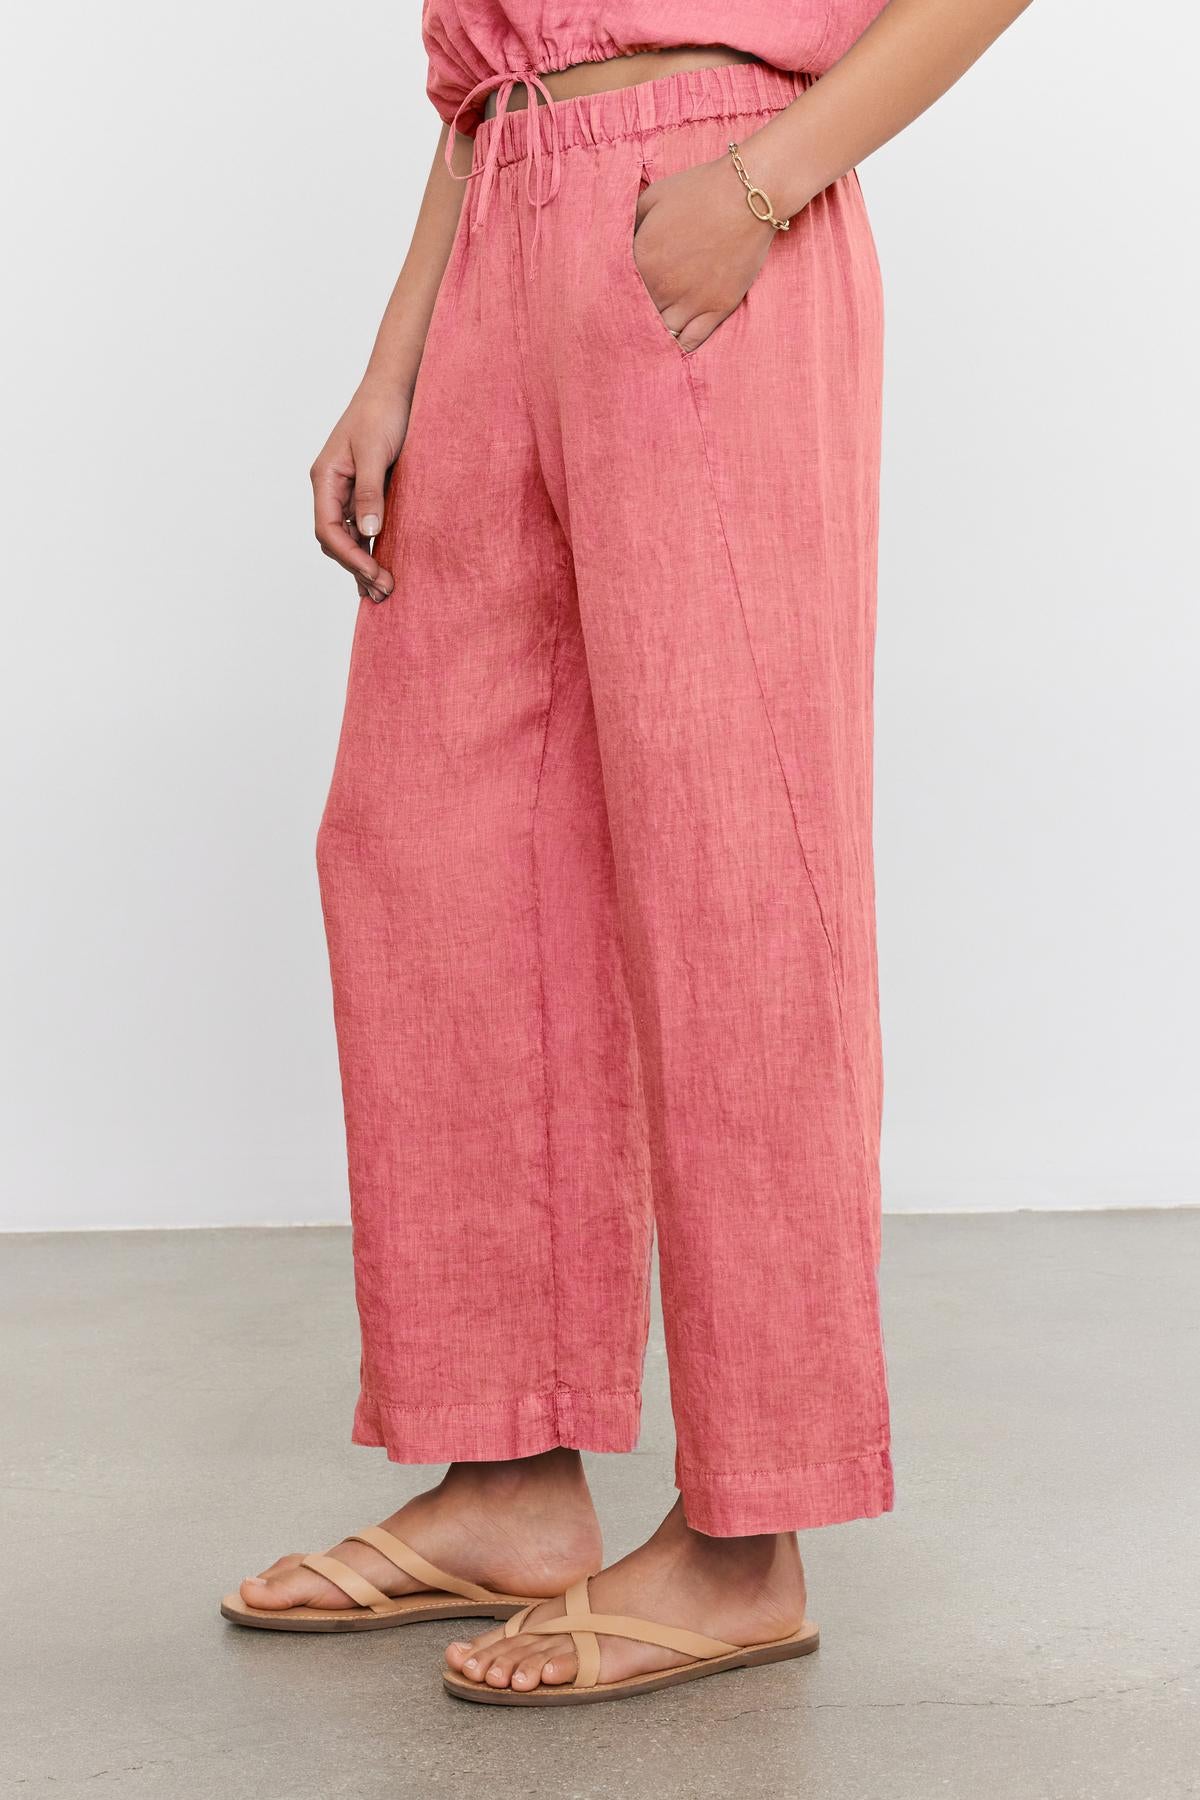 A person is wearing loose-fitting pink LOLA LINEN PANT by Velvet by Graham & Spencer with hands in pockets, a matching top, and beige sandals.-36943740633281